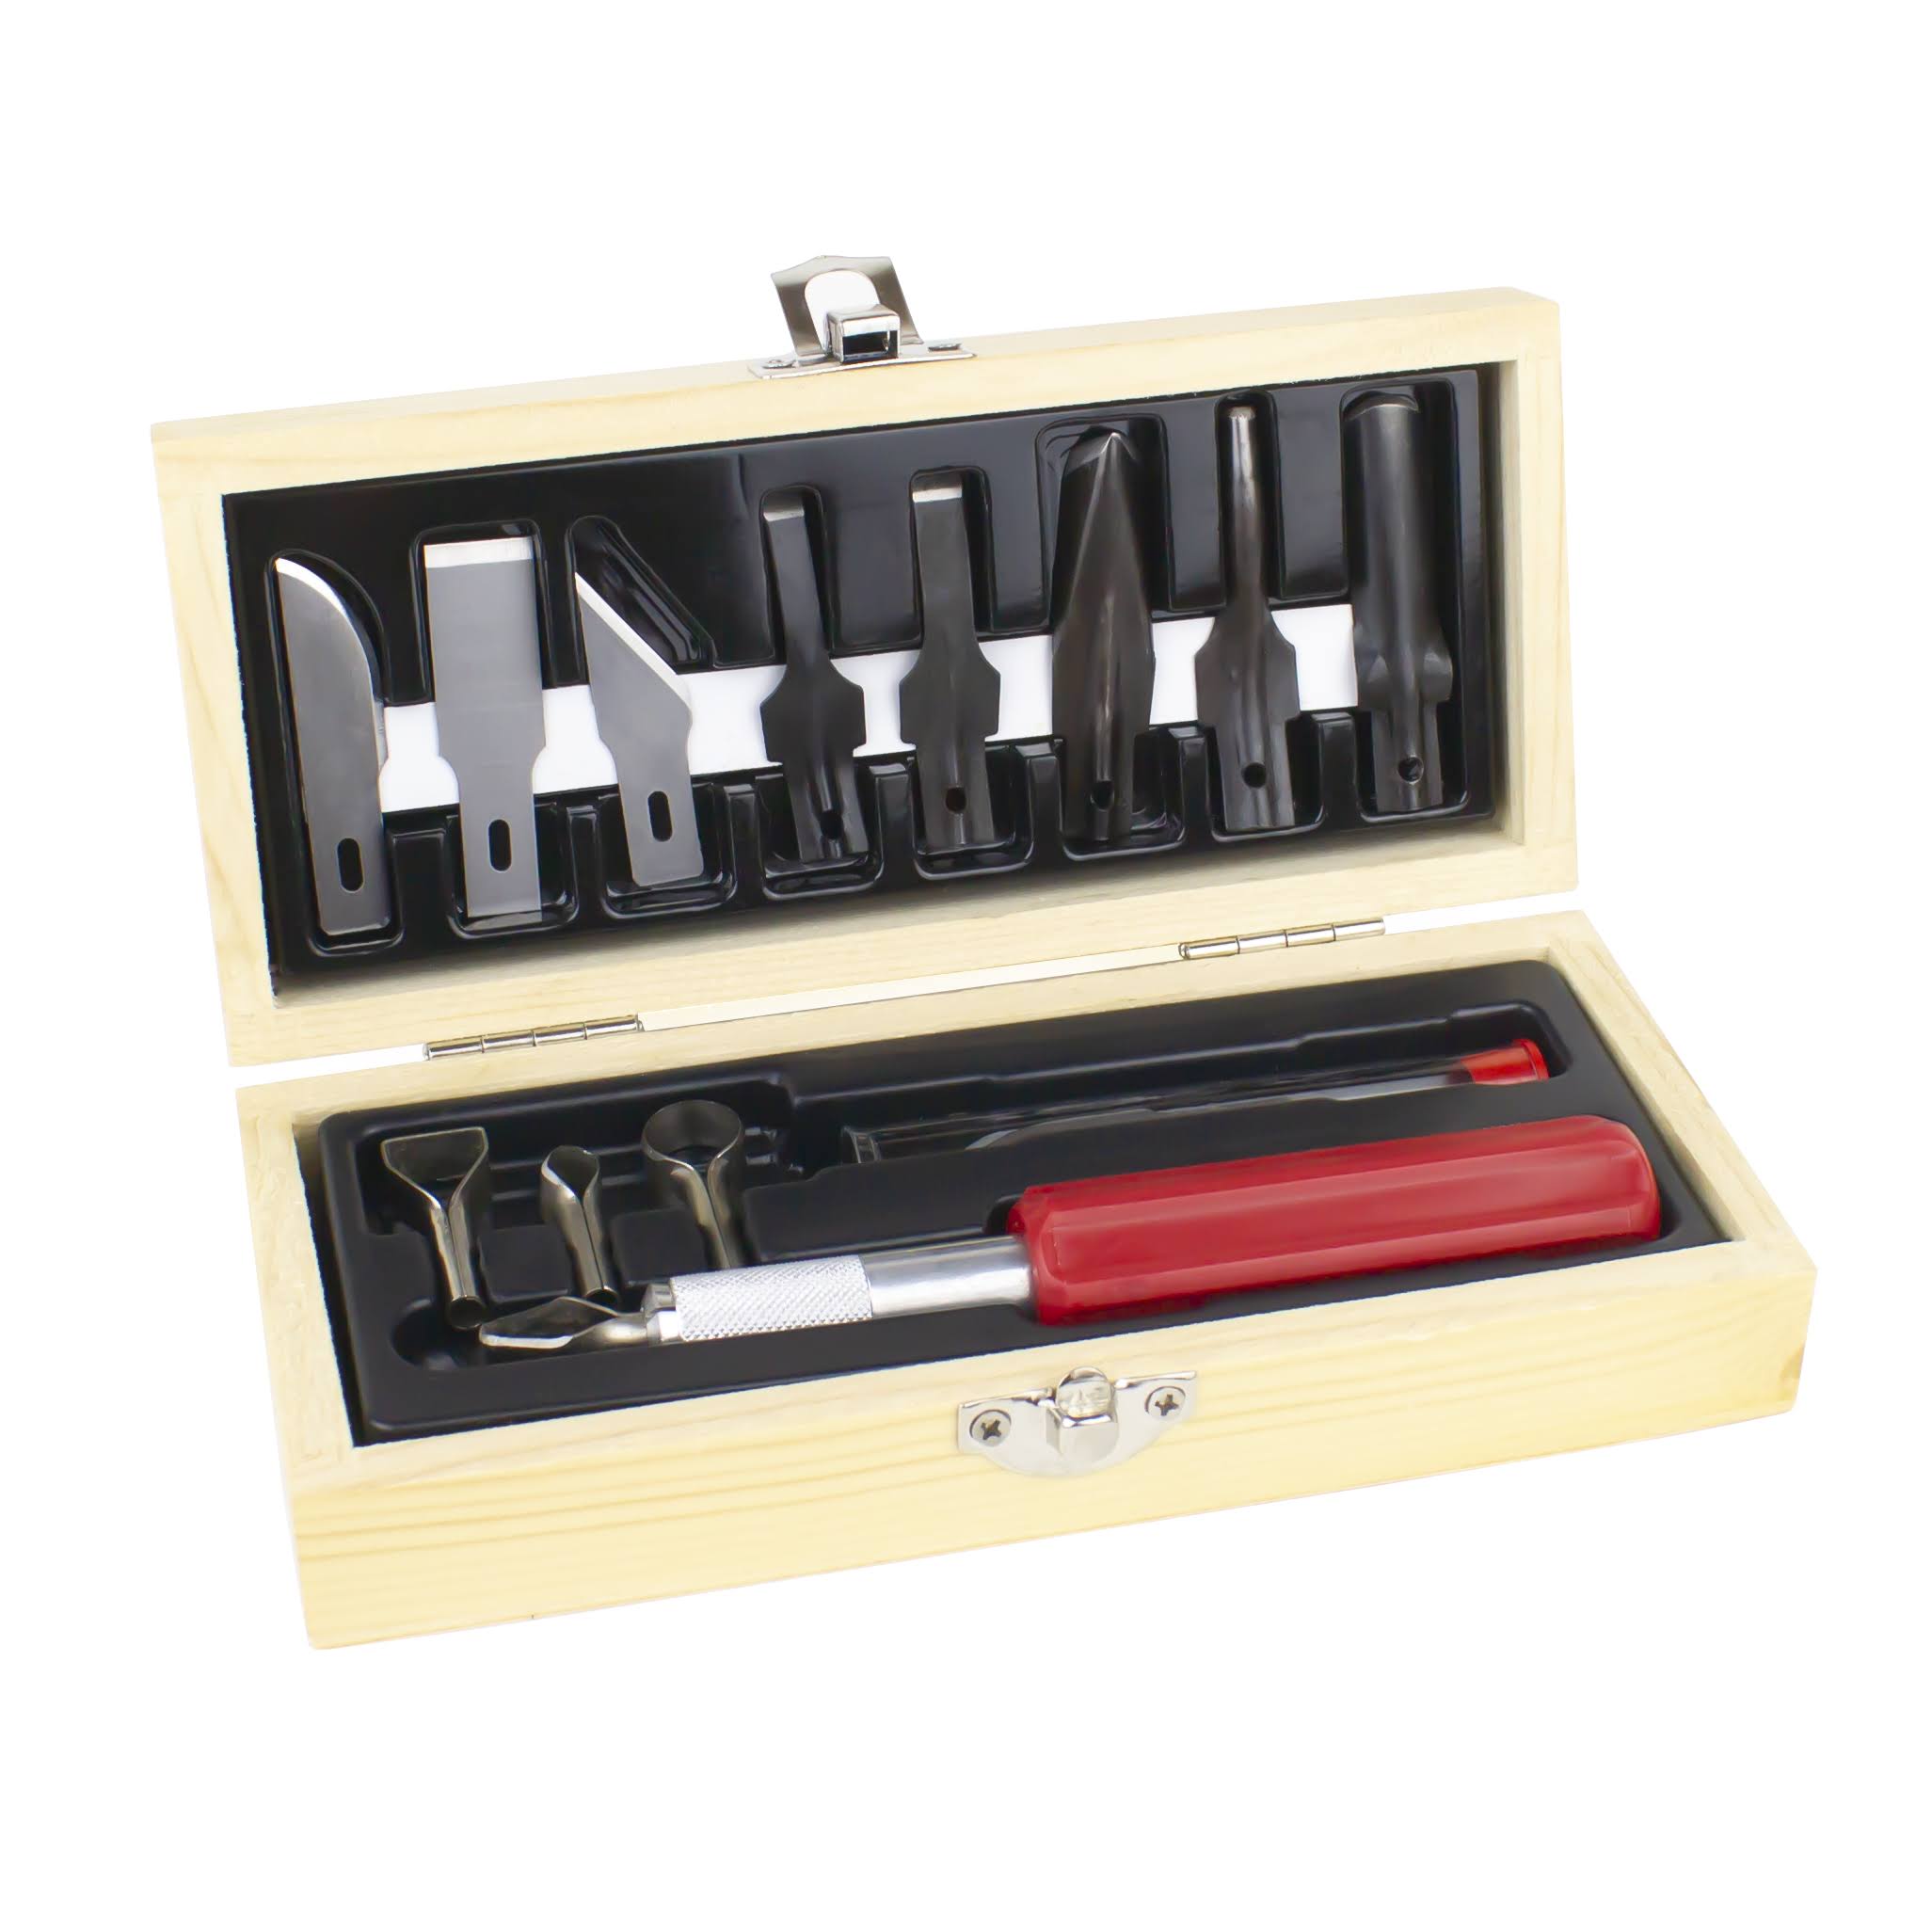 Excel Hobby Blade Wooden Box Woodworking Set - 16pcs